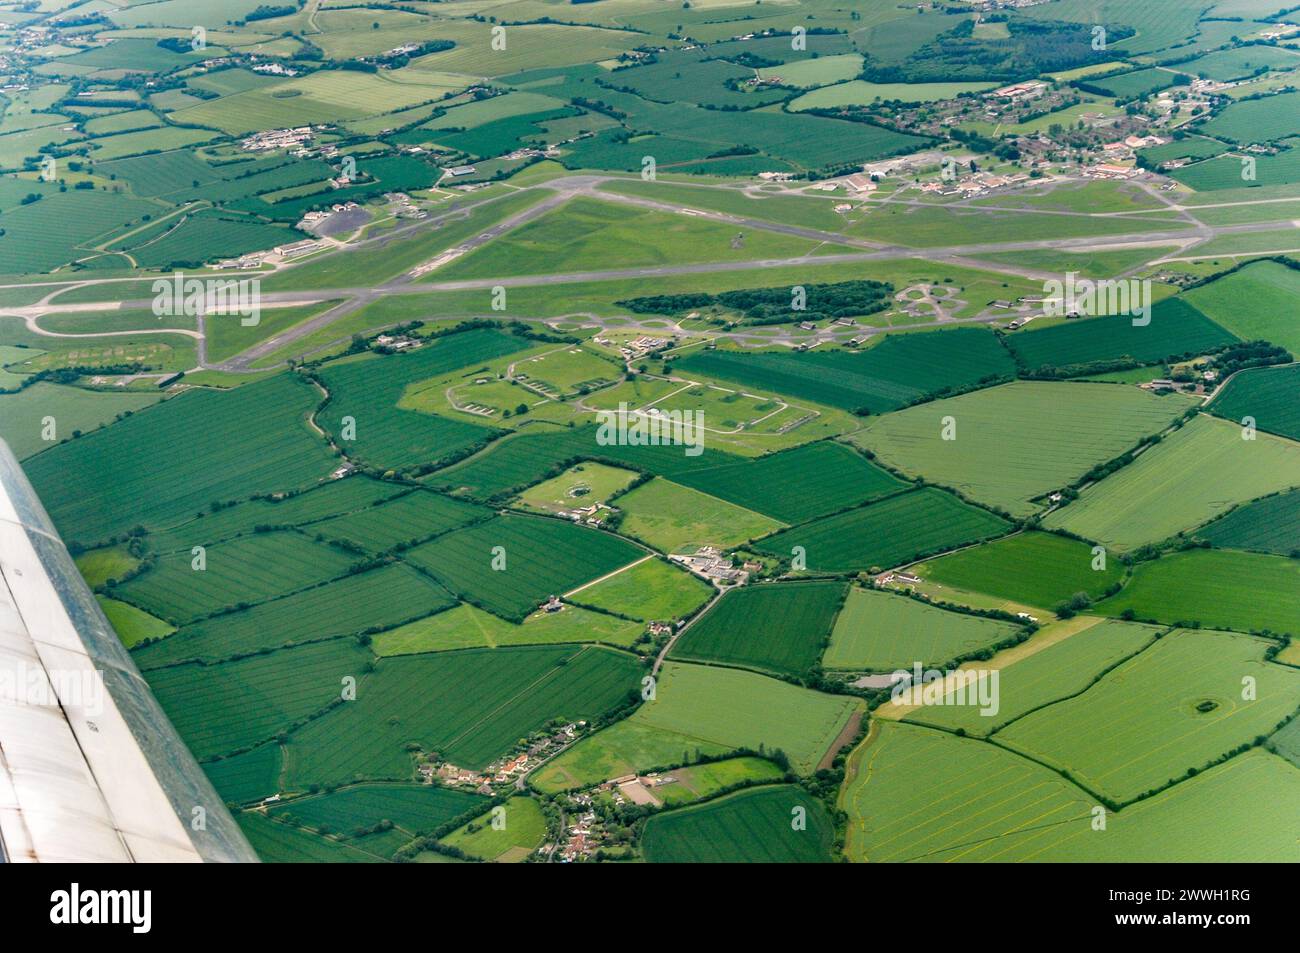 MDP Wethersfield, formerly RAF Wethersfield, in Essex, UK. Runway layout viewed from above. Used by wartime RAF and Cold War USAF aircraft Stock Photo